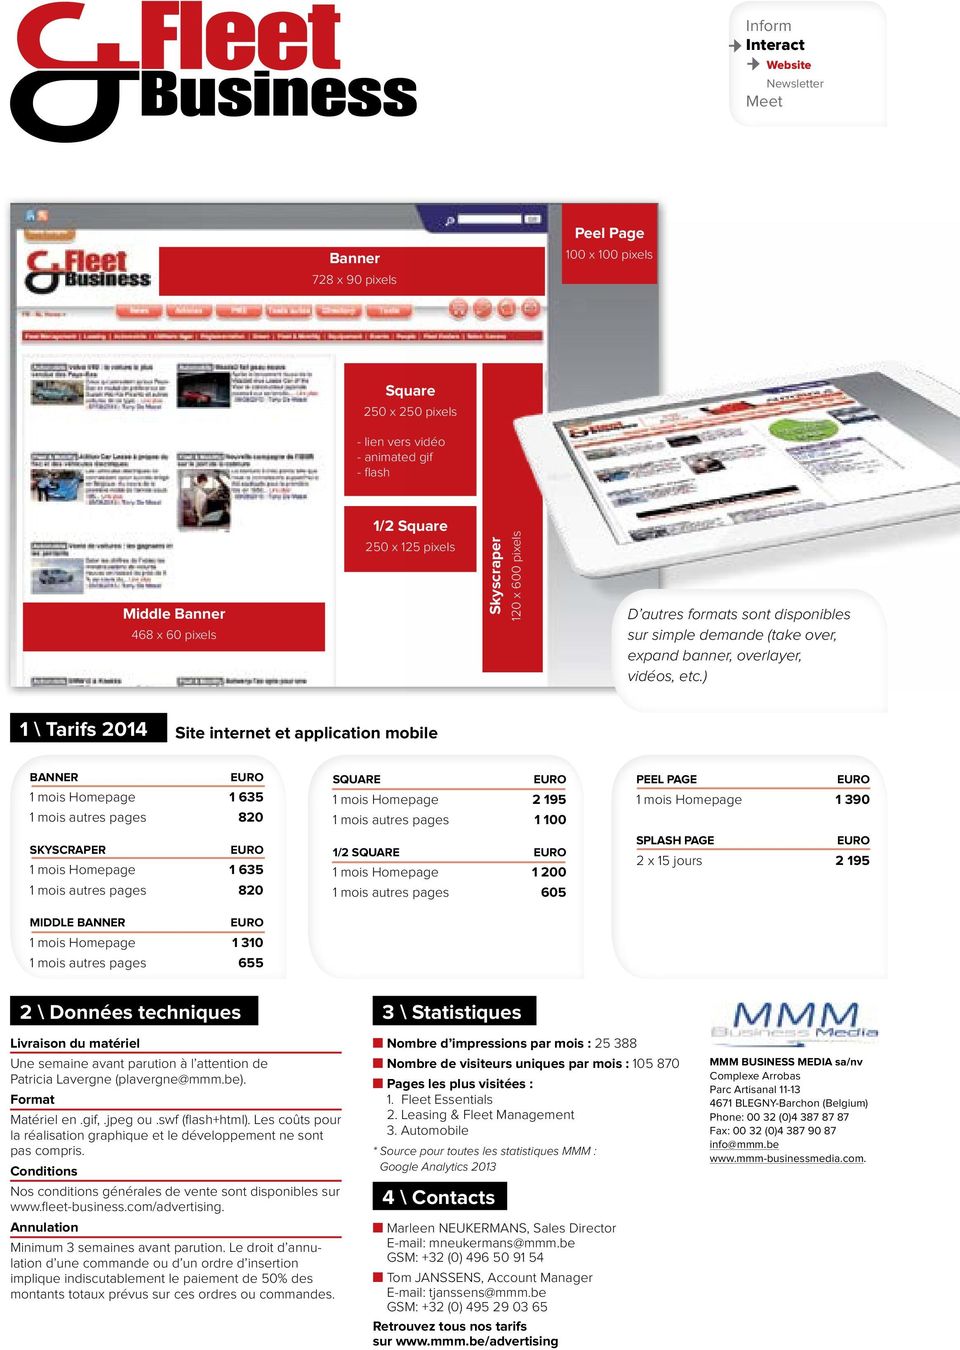 ) 1 \ Tarifs 2014 Site internet et application mobile BANNER 1 mois Homepage 1 635 1 mois autres pages 820 SKYSCRAPER 1 mois Homepage 1 635 1 mois autres pages 820 MIDDLE BANNER 1 mois Homepage 1 310